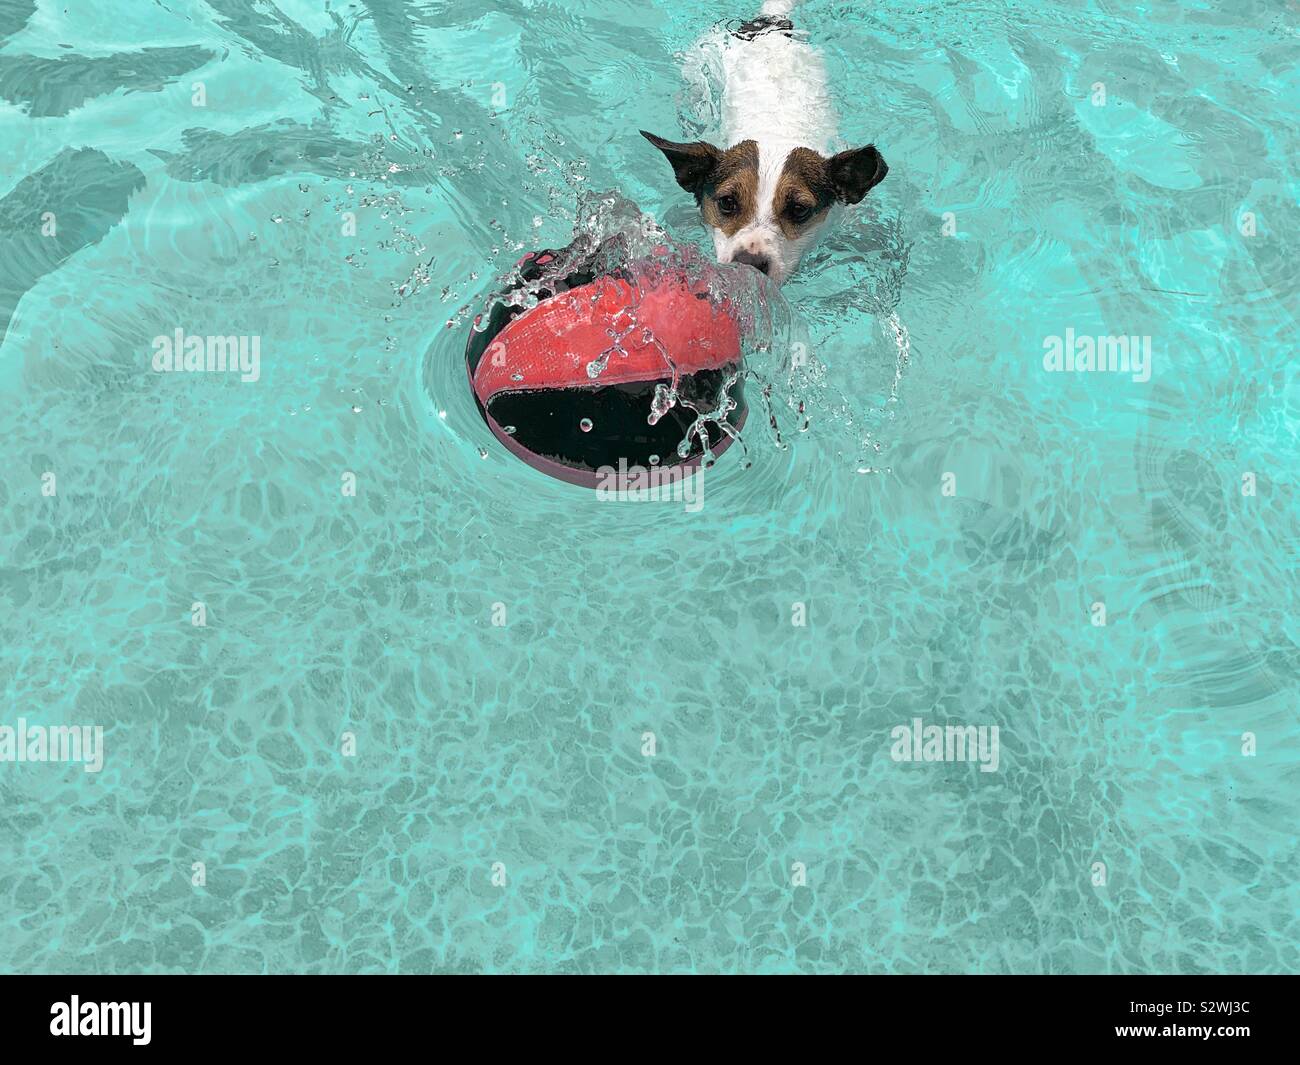 Dog chasing ball in water. Stock Photo